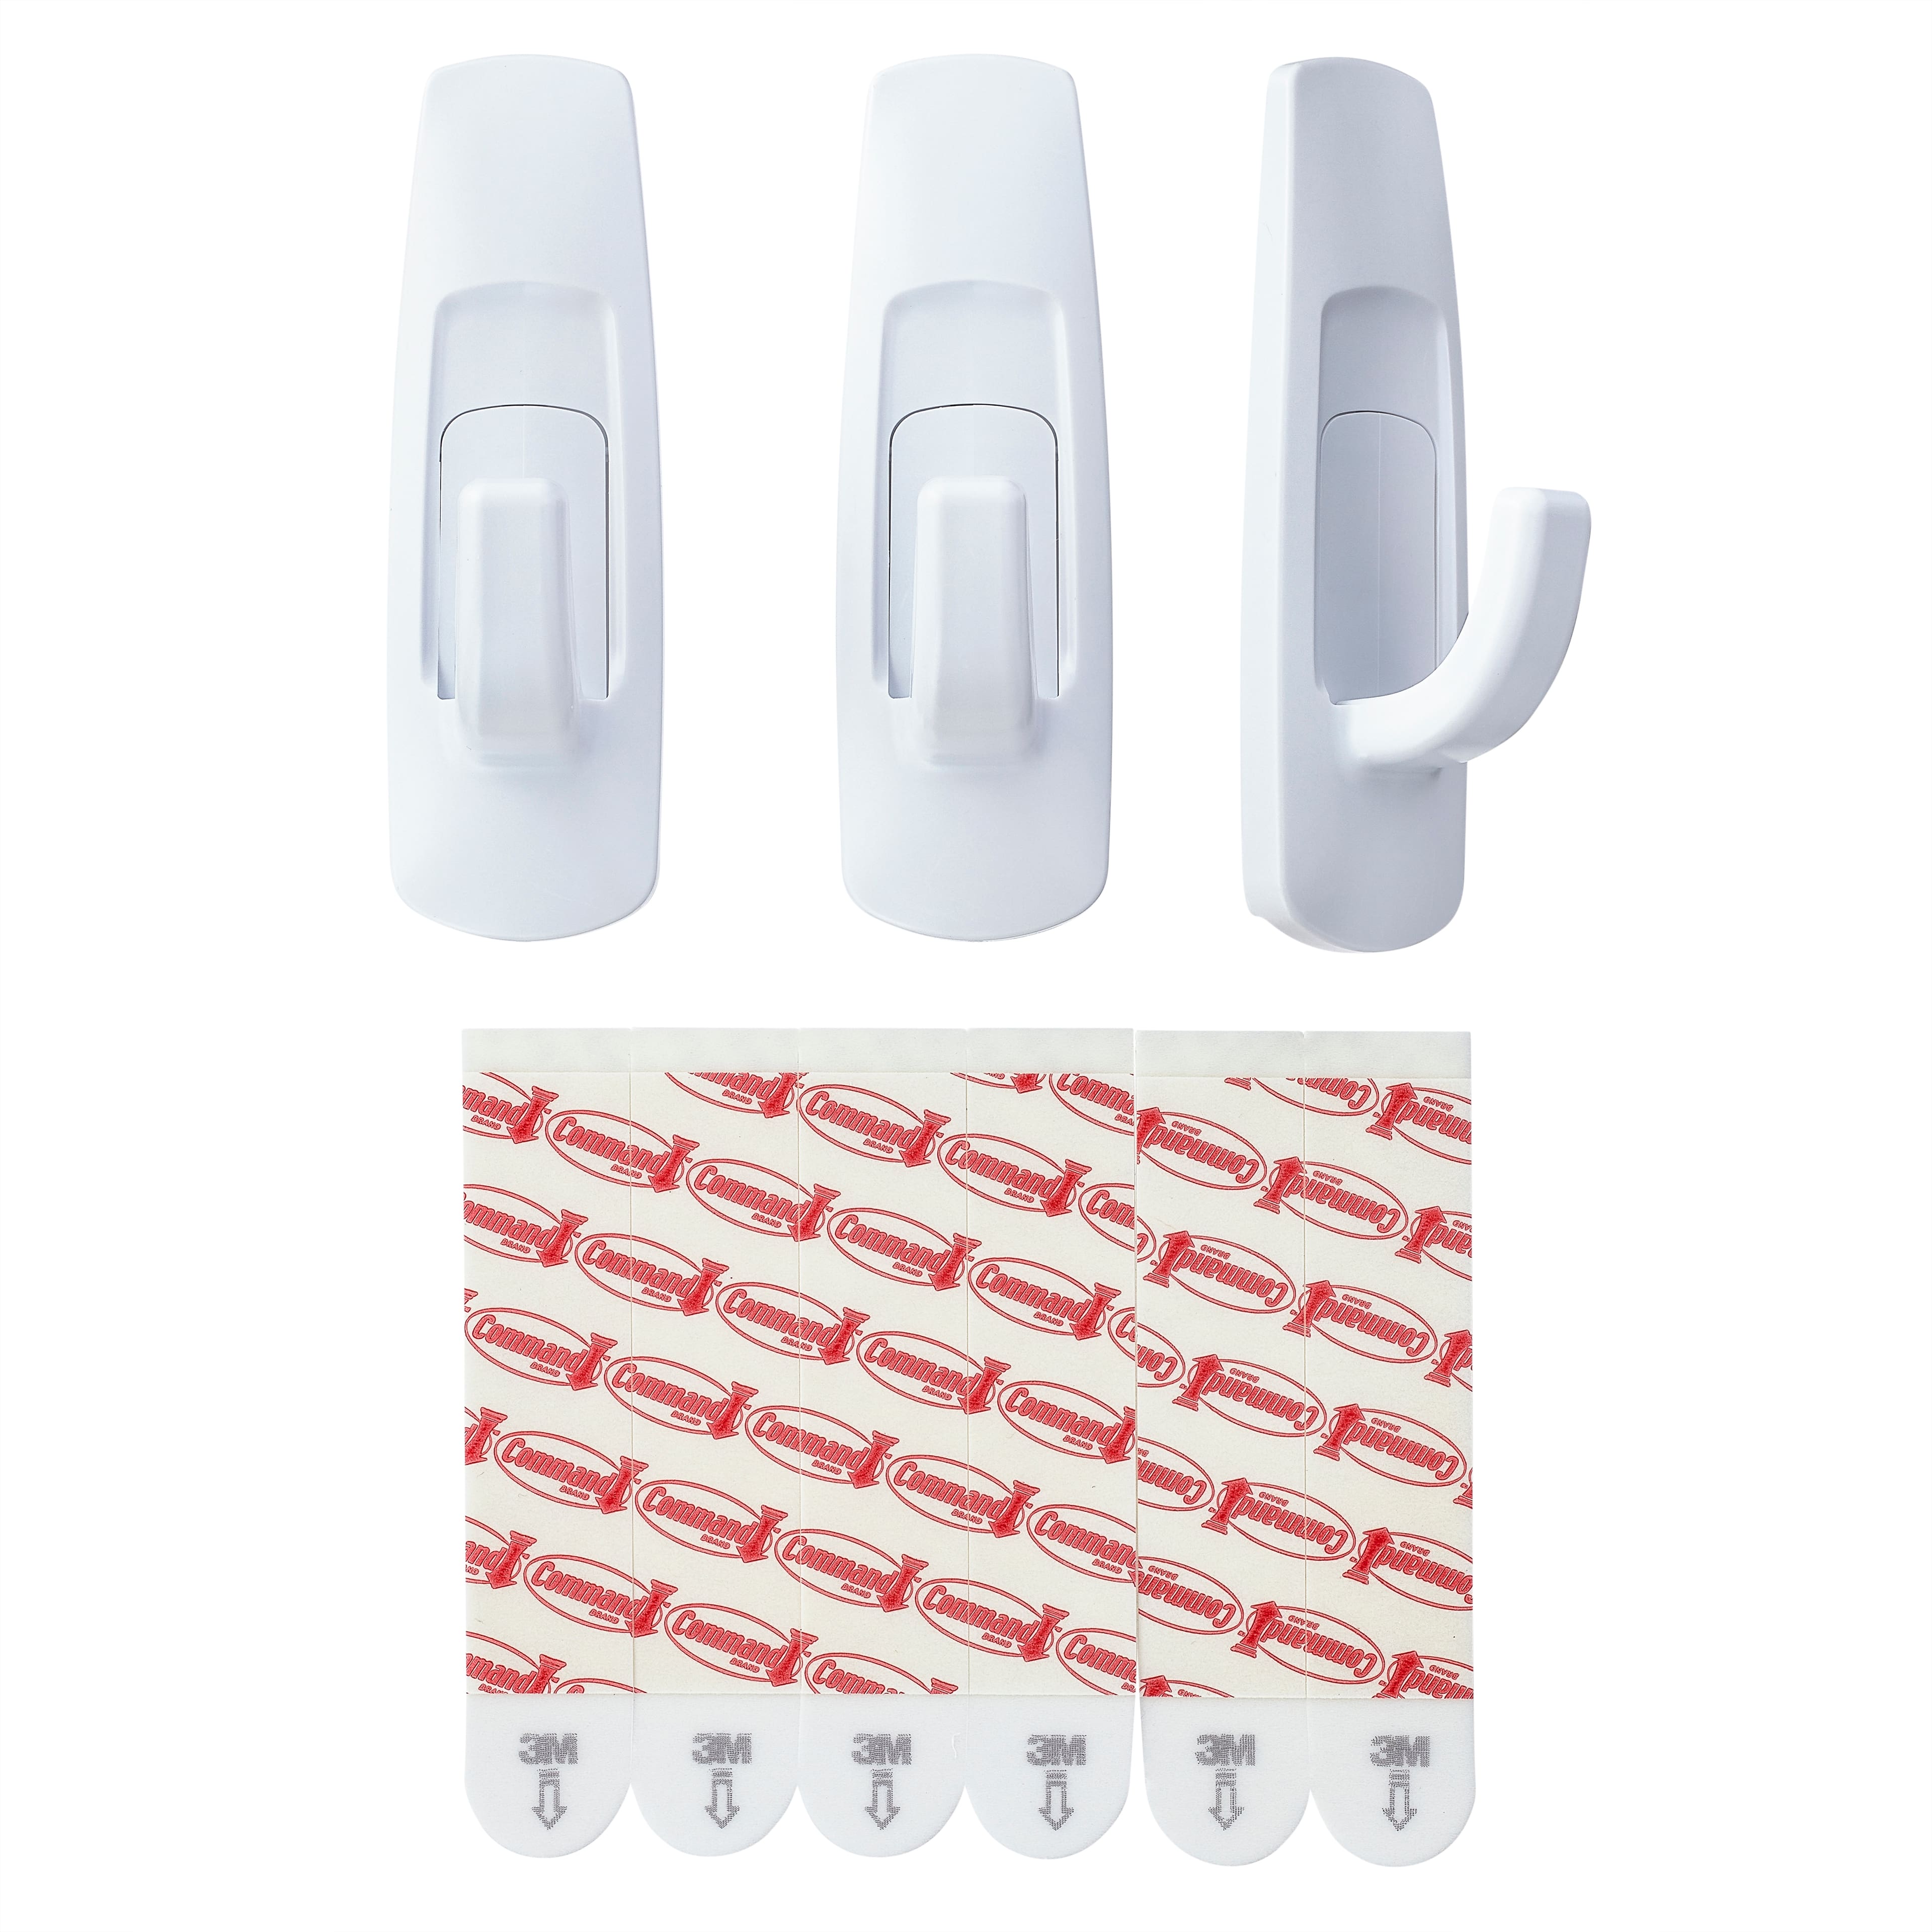 12 Packs: 3 ct. (36 total) Command&#x2122; Large White Utility Hooks